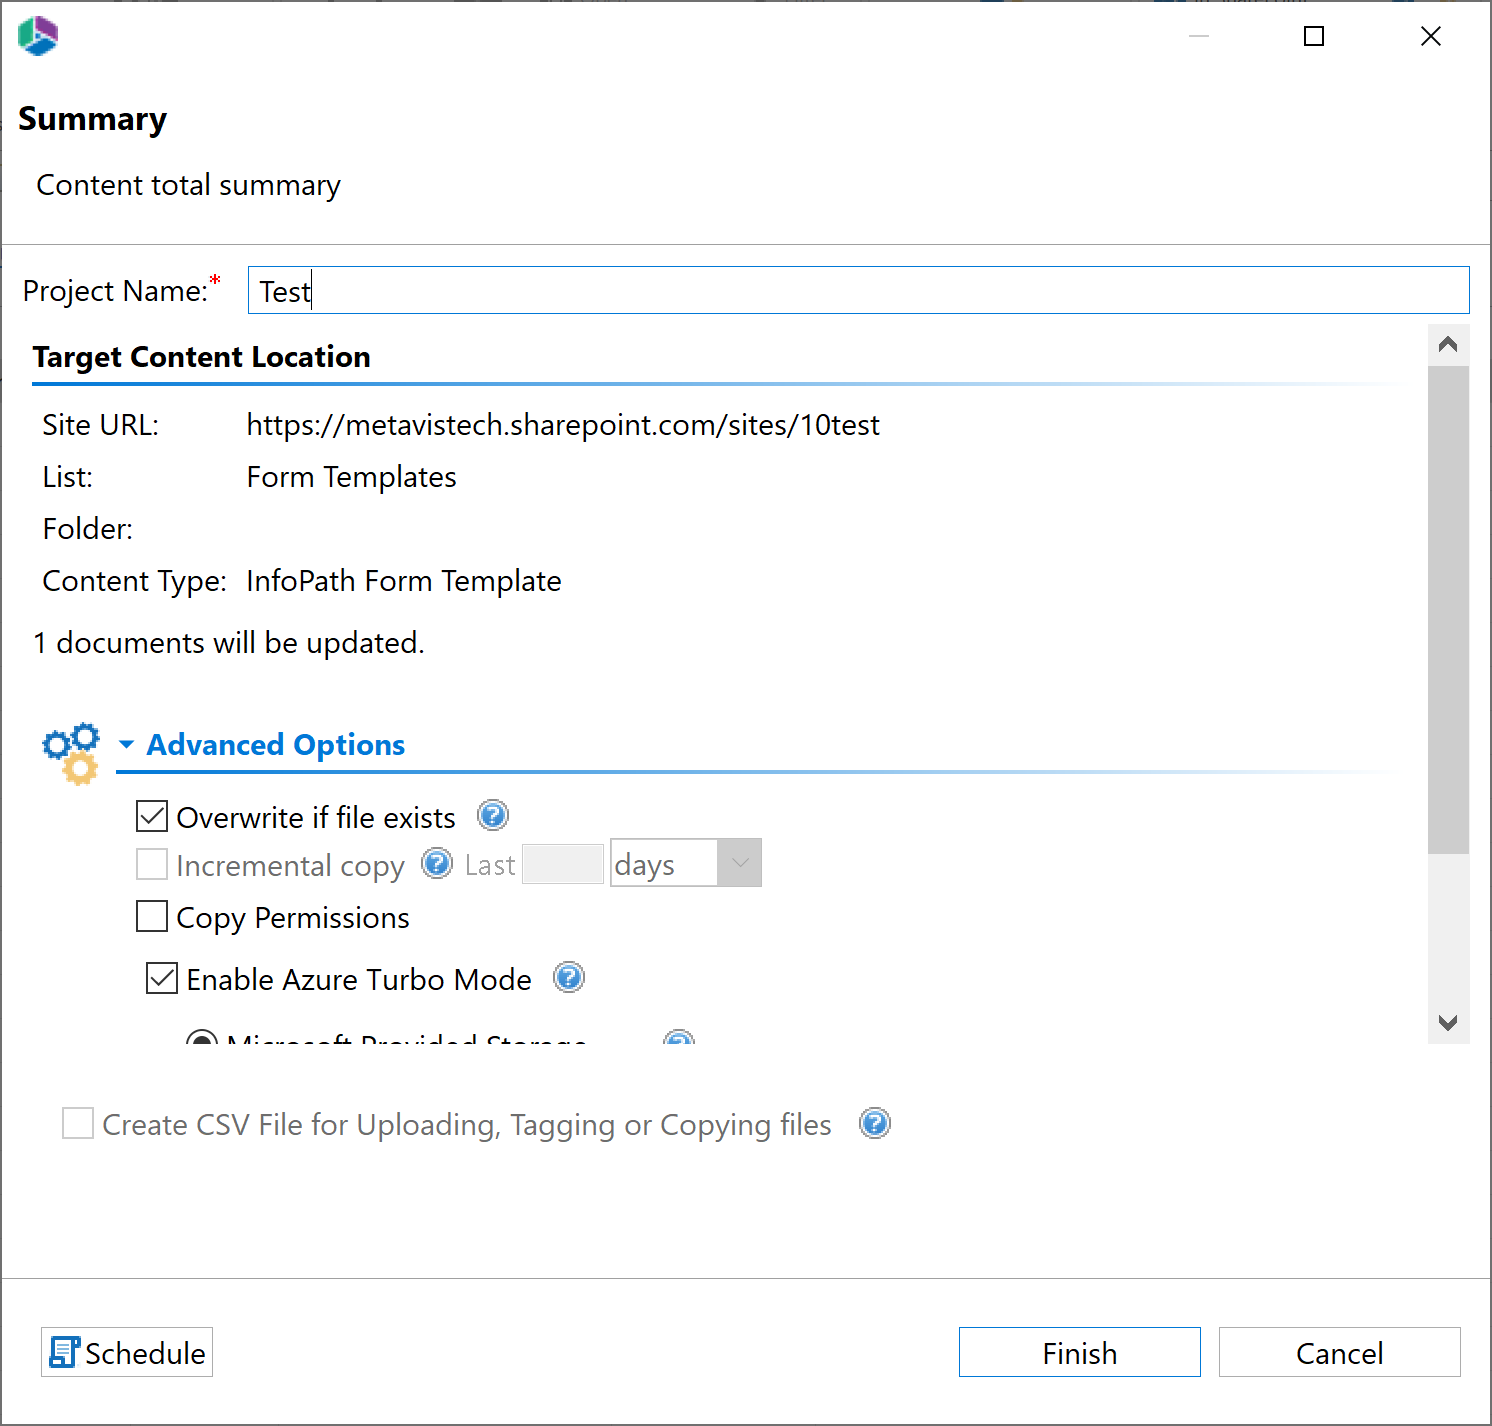 Migration mode move copy and tag sharepoint content